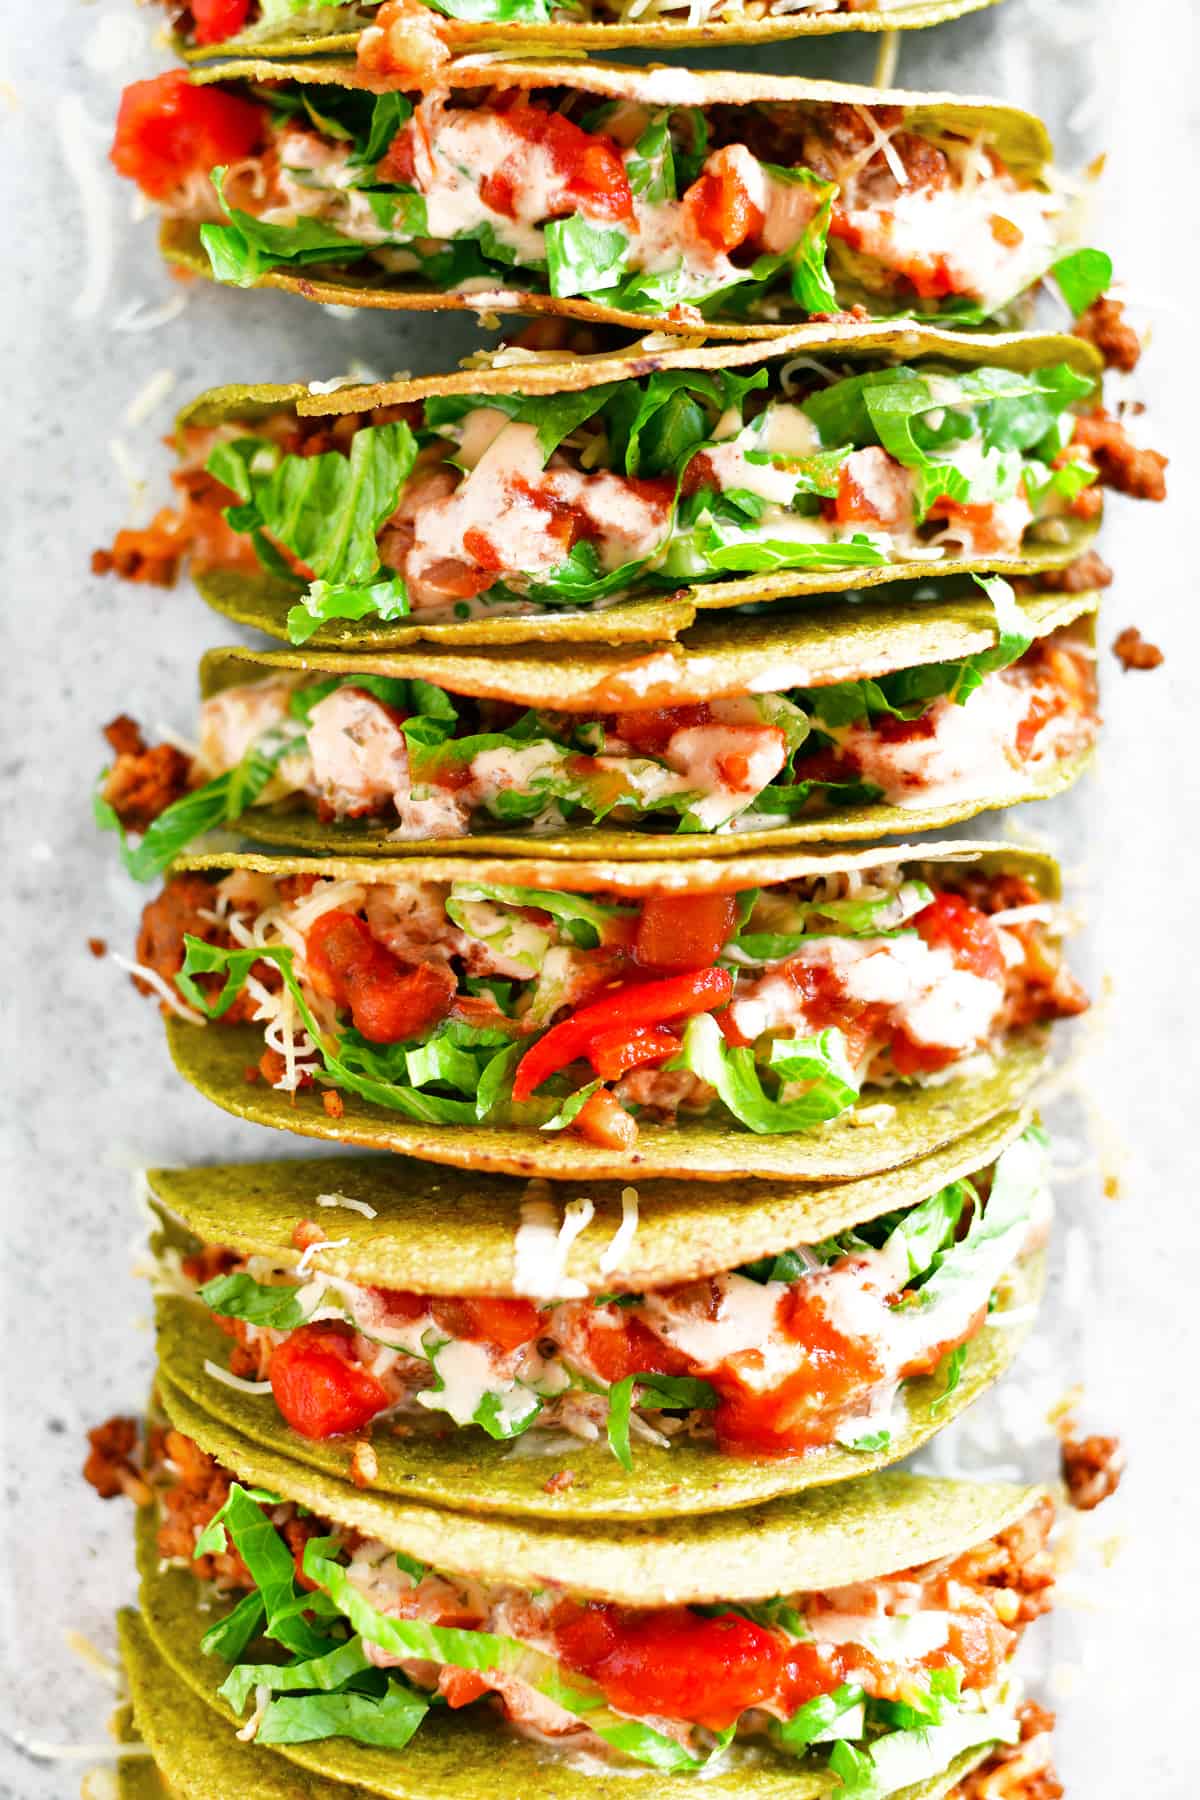 oven baked tacos from top